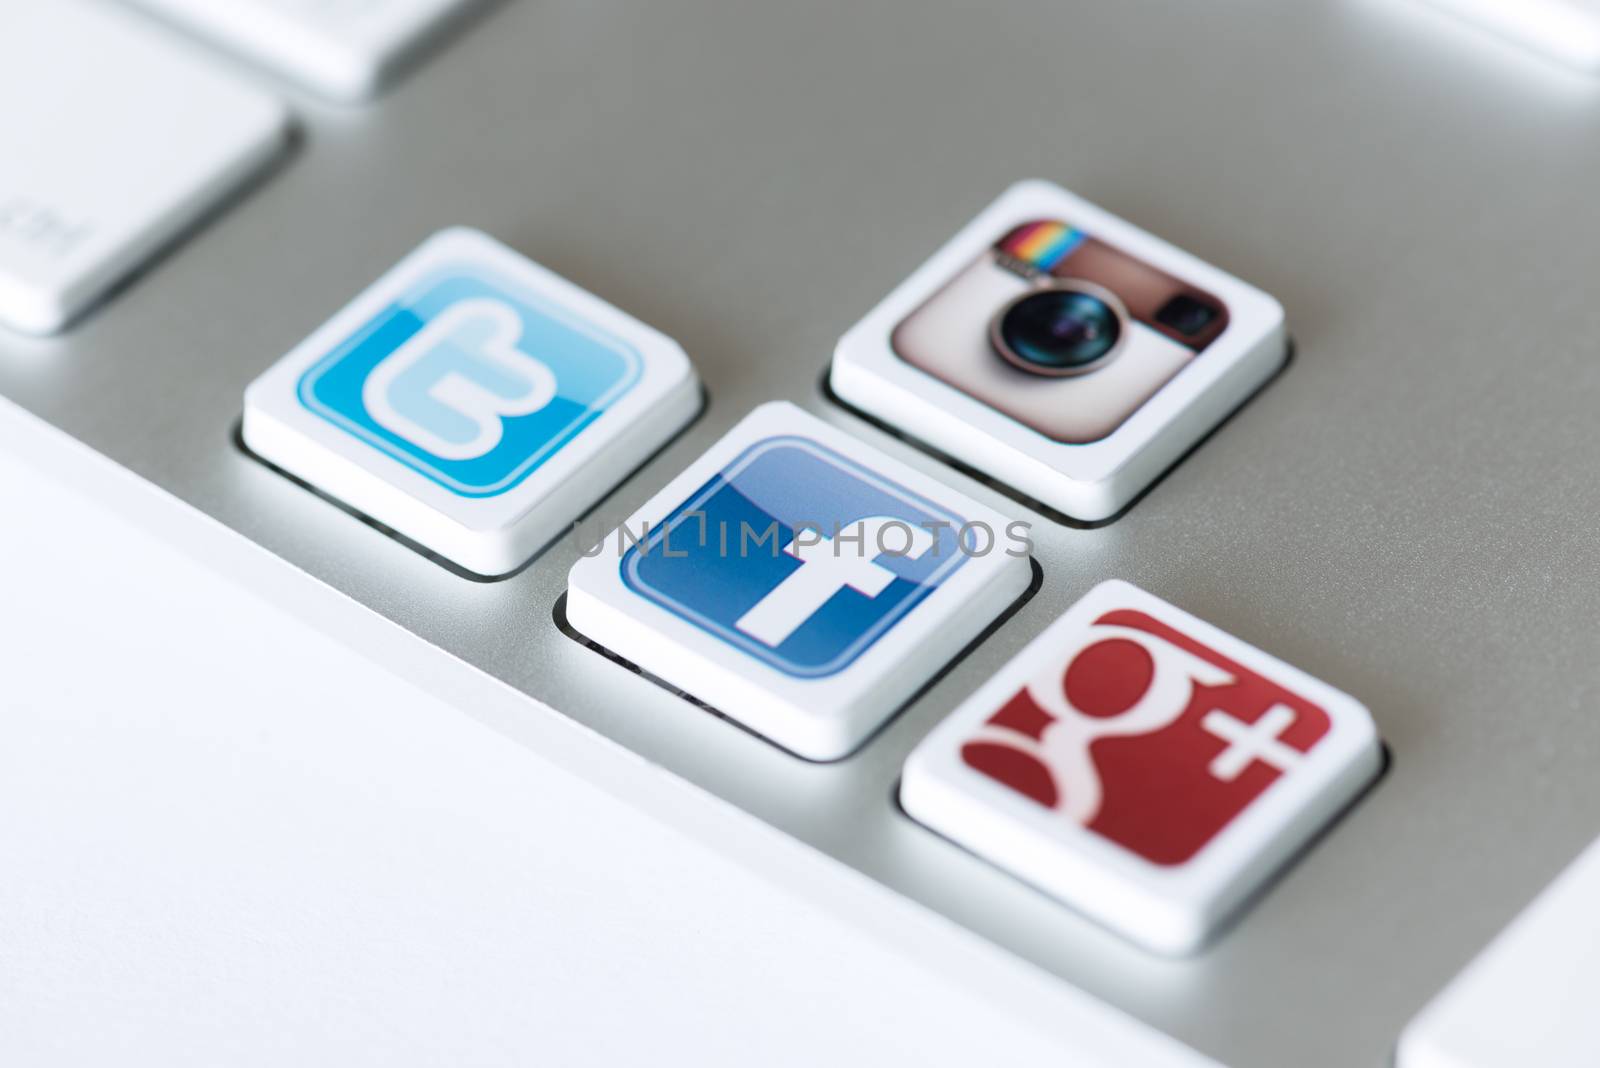 Kiev, Ukraine - May 20, 2013 - A social media icons of Facebook, Twitter, Google Plus and Instagram placed on computer keyboard keys.